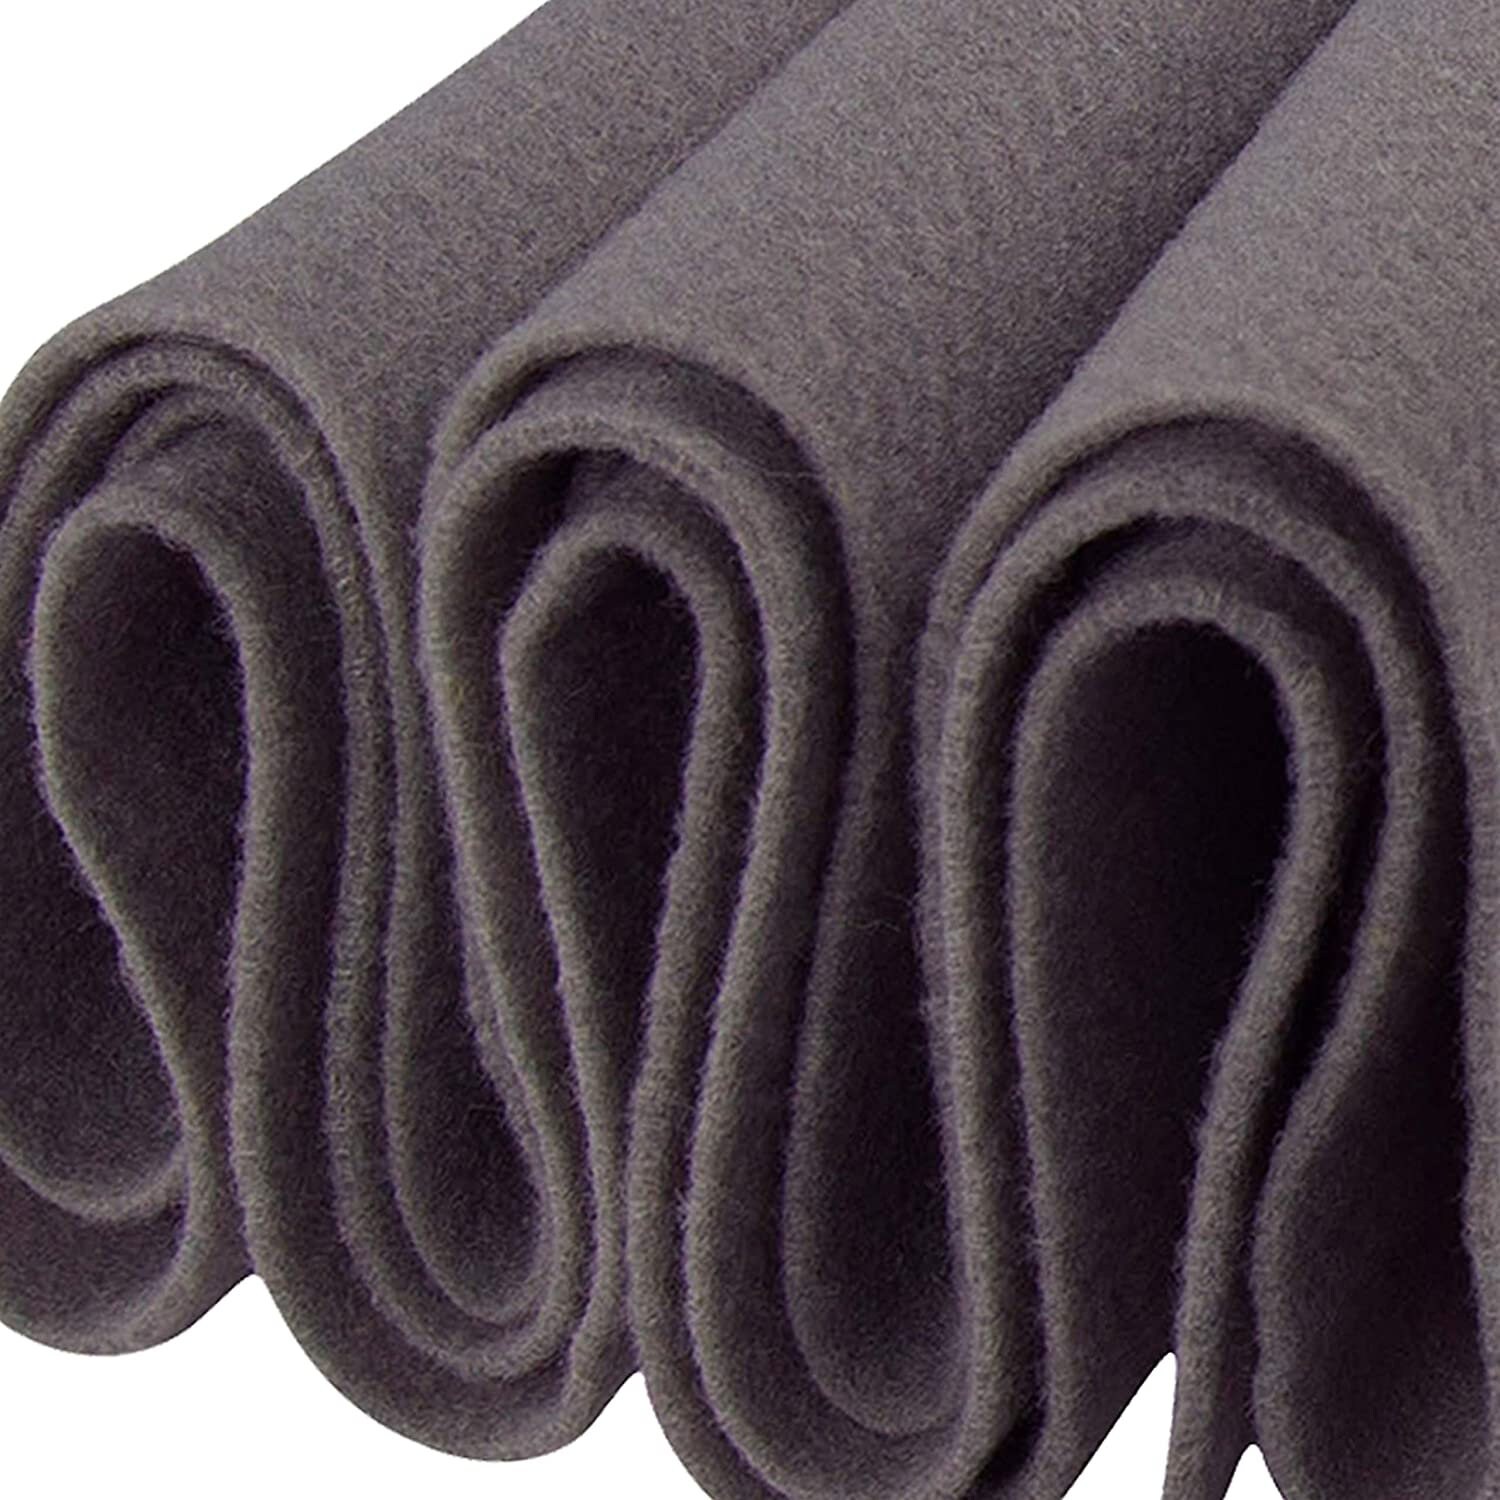 Craft Felt Fabric by The Yard Thickness 1.6mm 36 x 72 Soft and Durable  Felt Fabric for Sewing Crafts Blankets DIY Creative Project (Black)